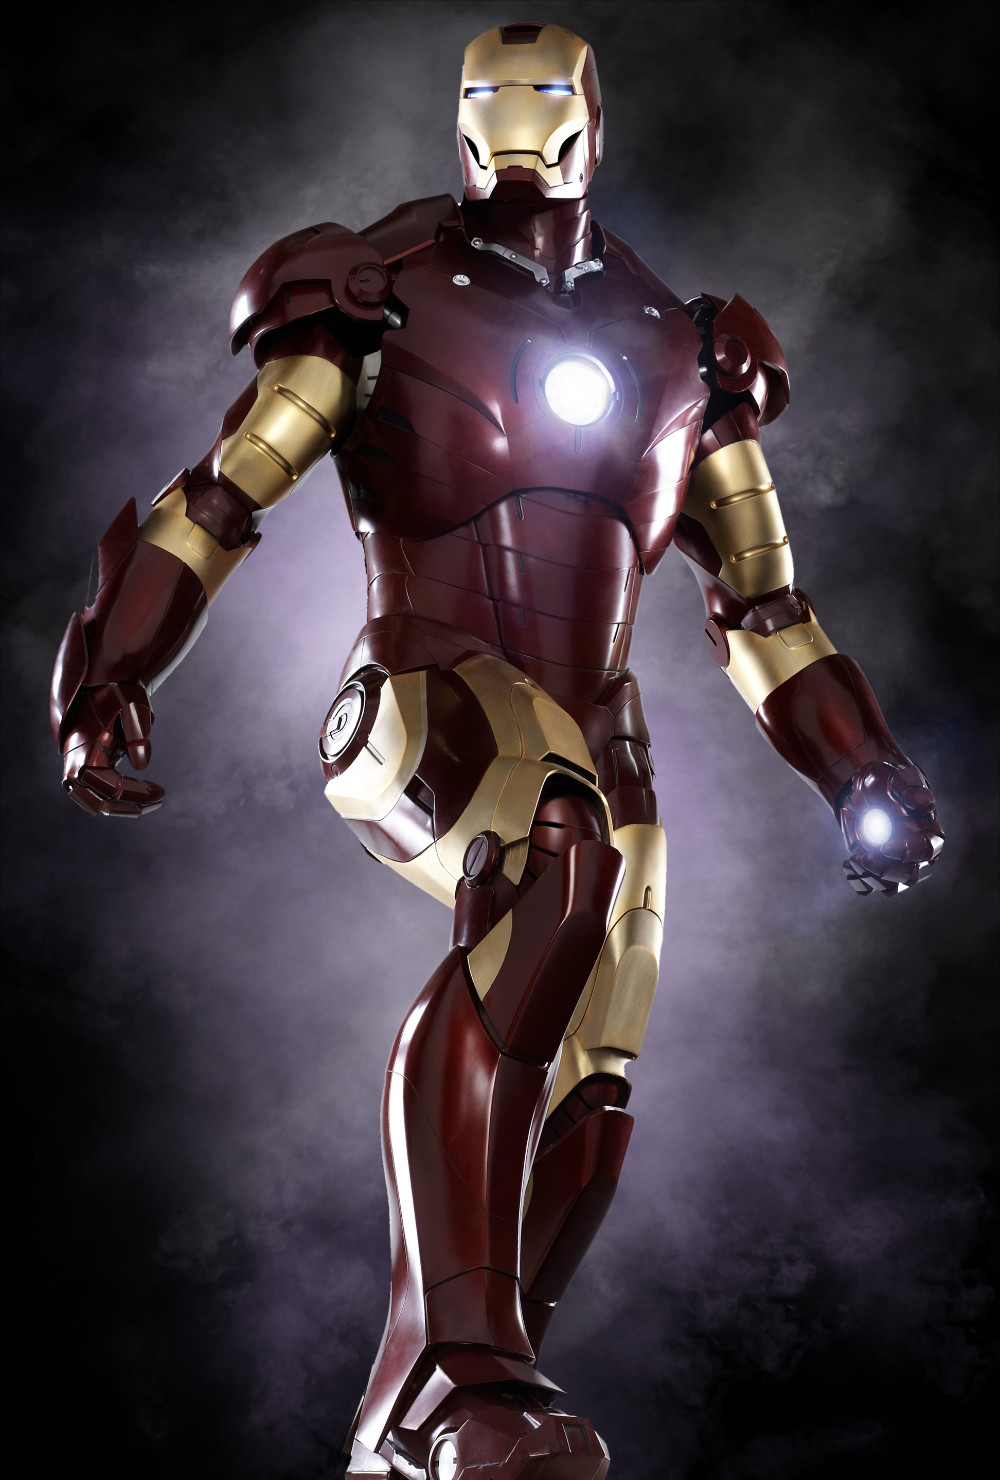 Read more about the article Film Review: Iron Man